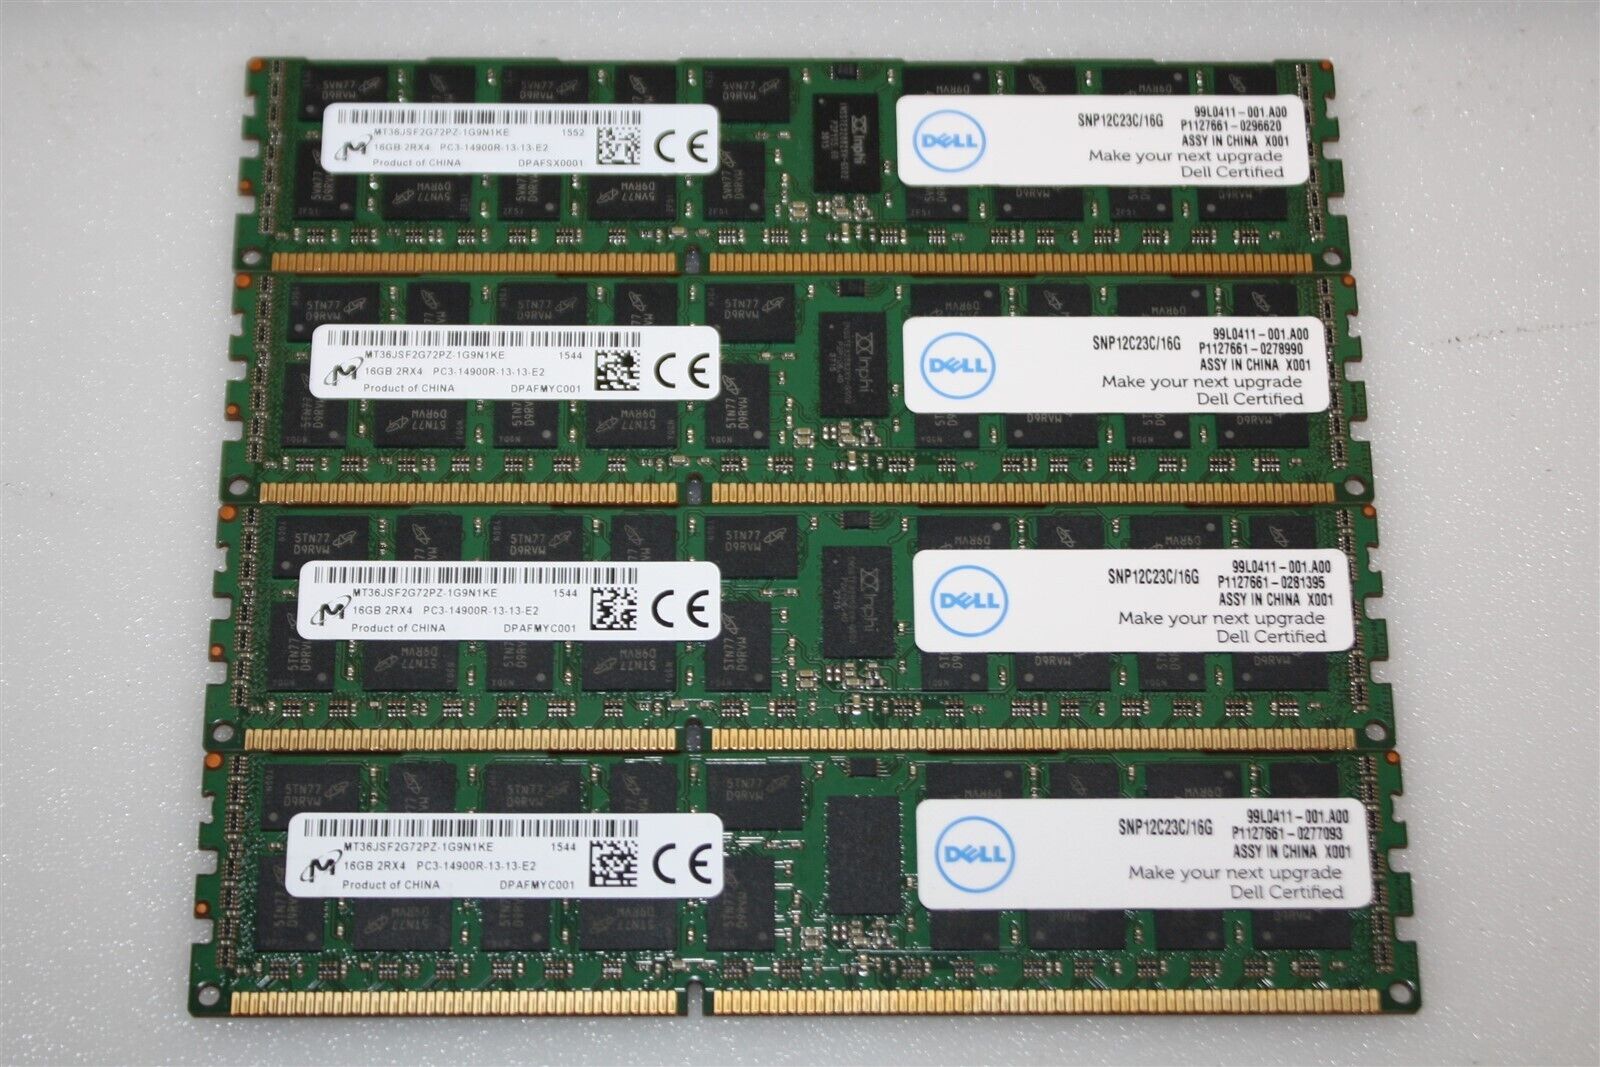 Lot of Four DDR3 Server RAM: Micron 16GB 2Rx4 PC3-14900R-13-13-E2 / TESTED /USED